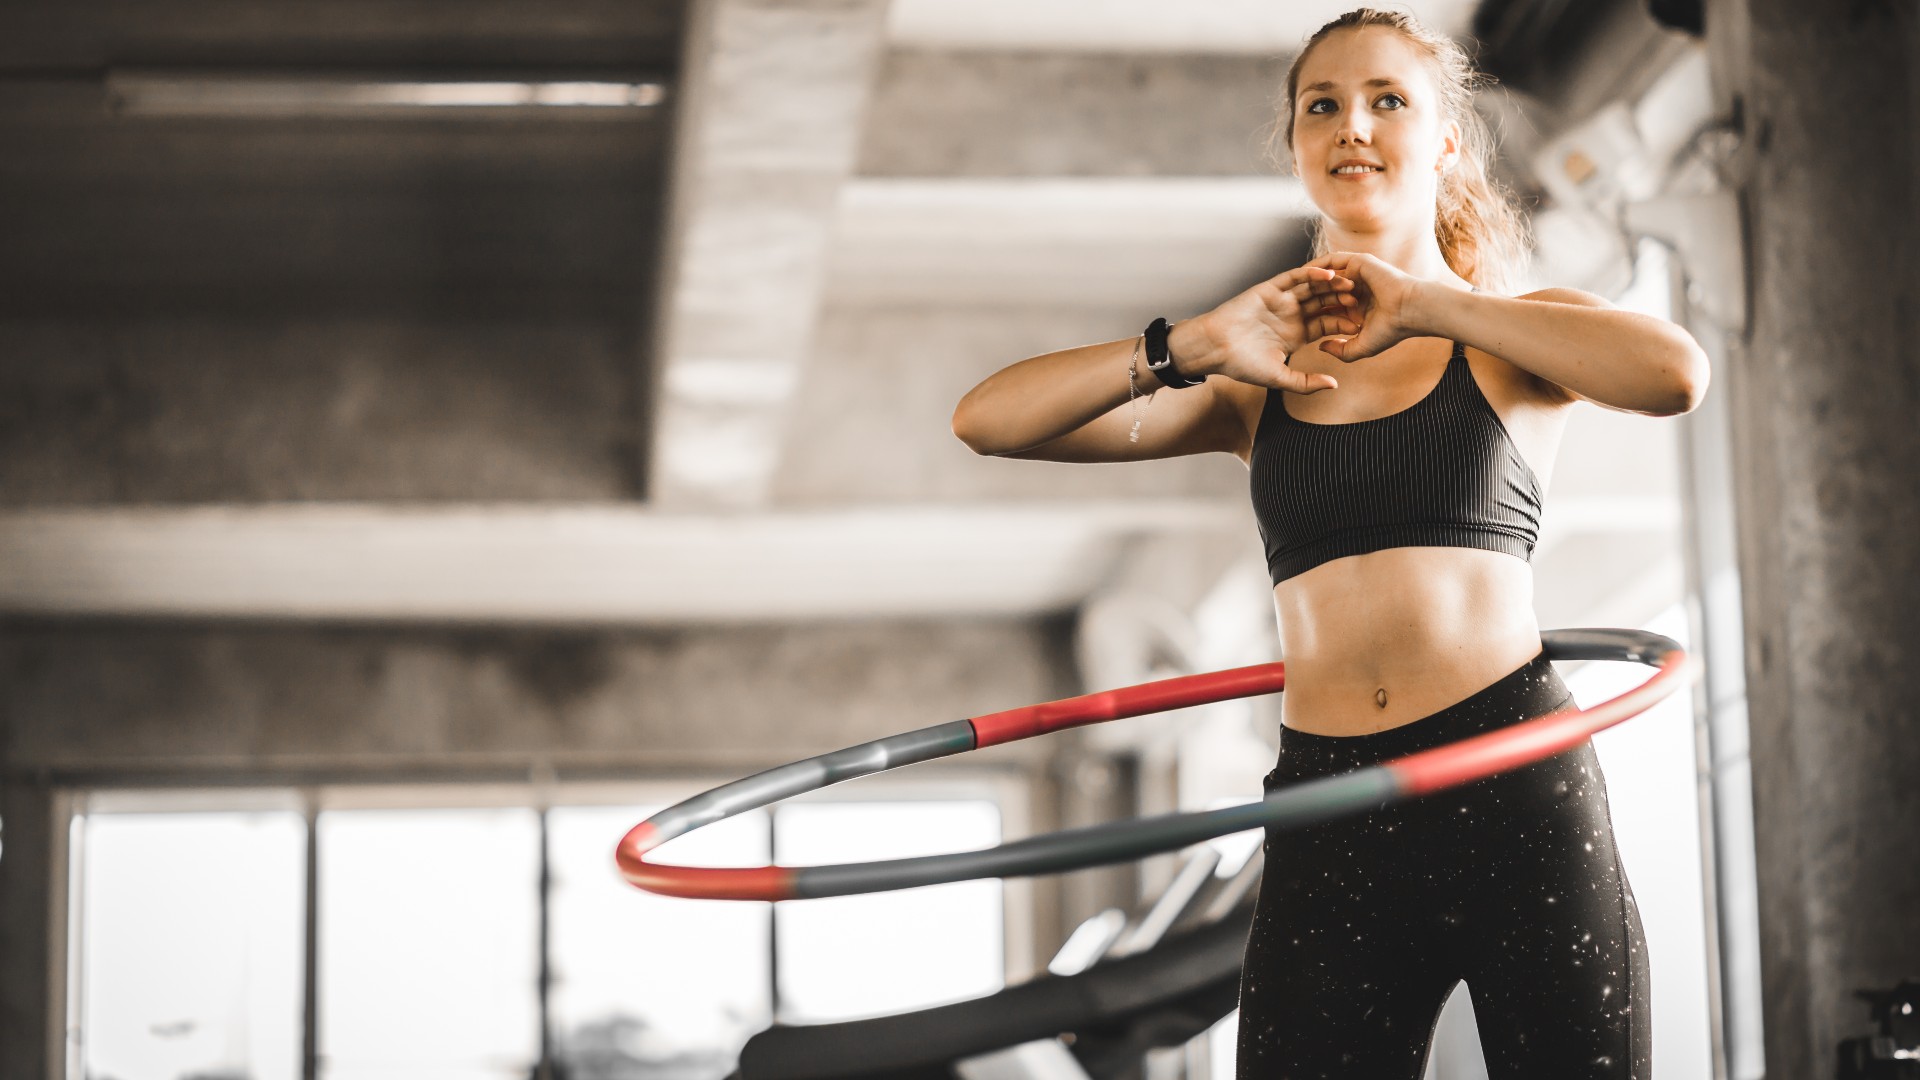 We Tried a Weighted Hula Hoop for 6 Weeks